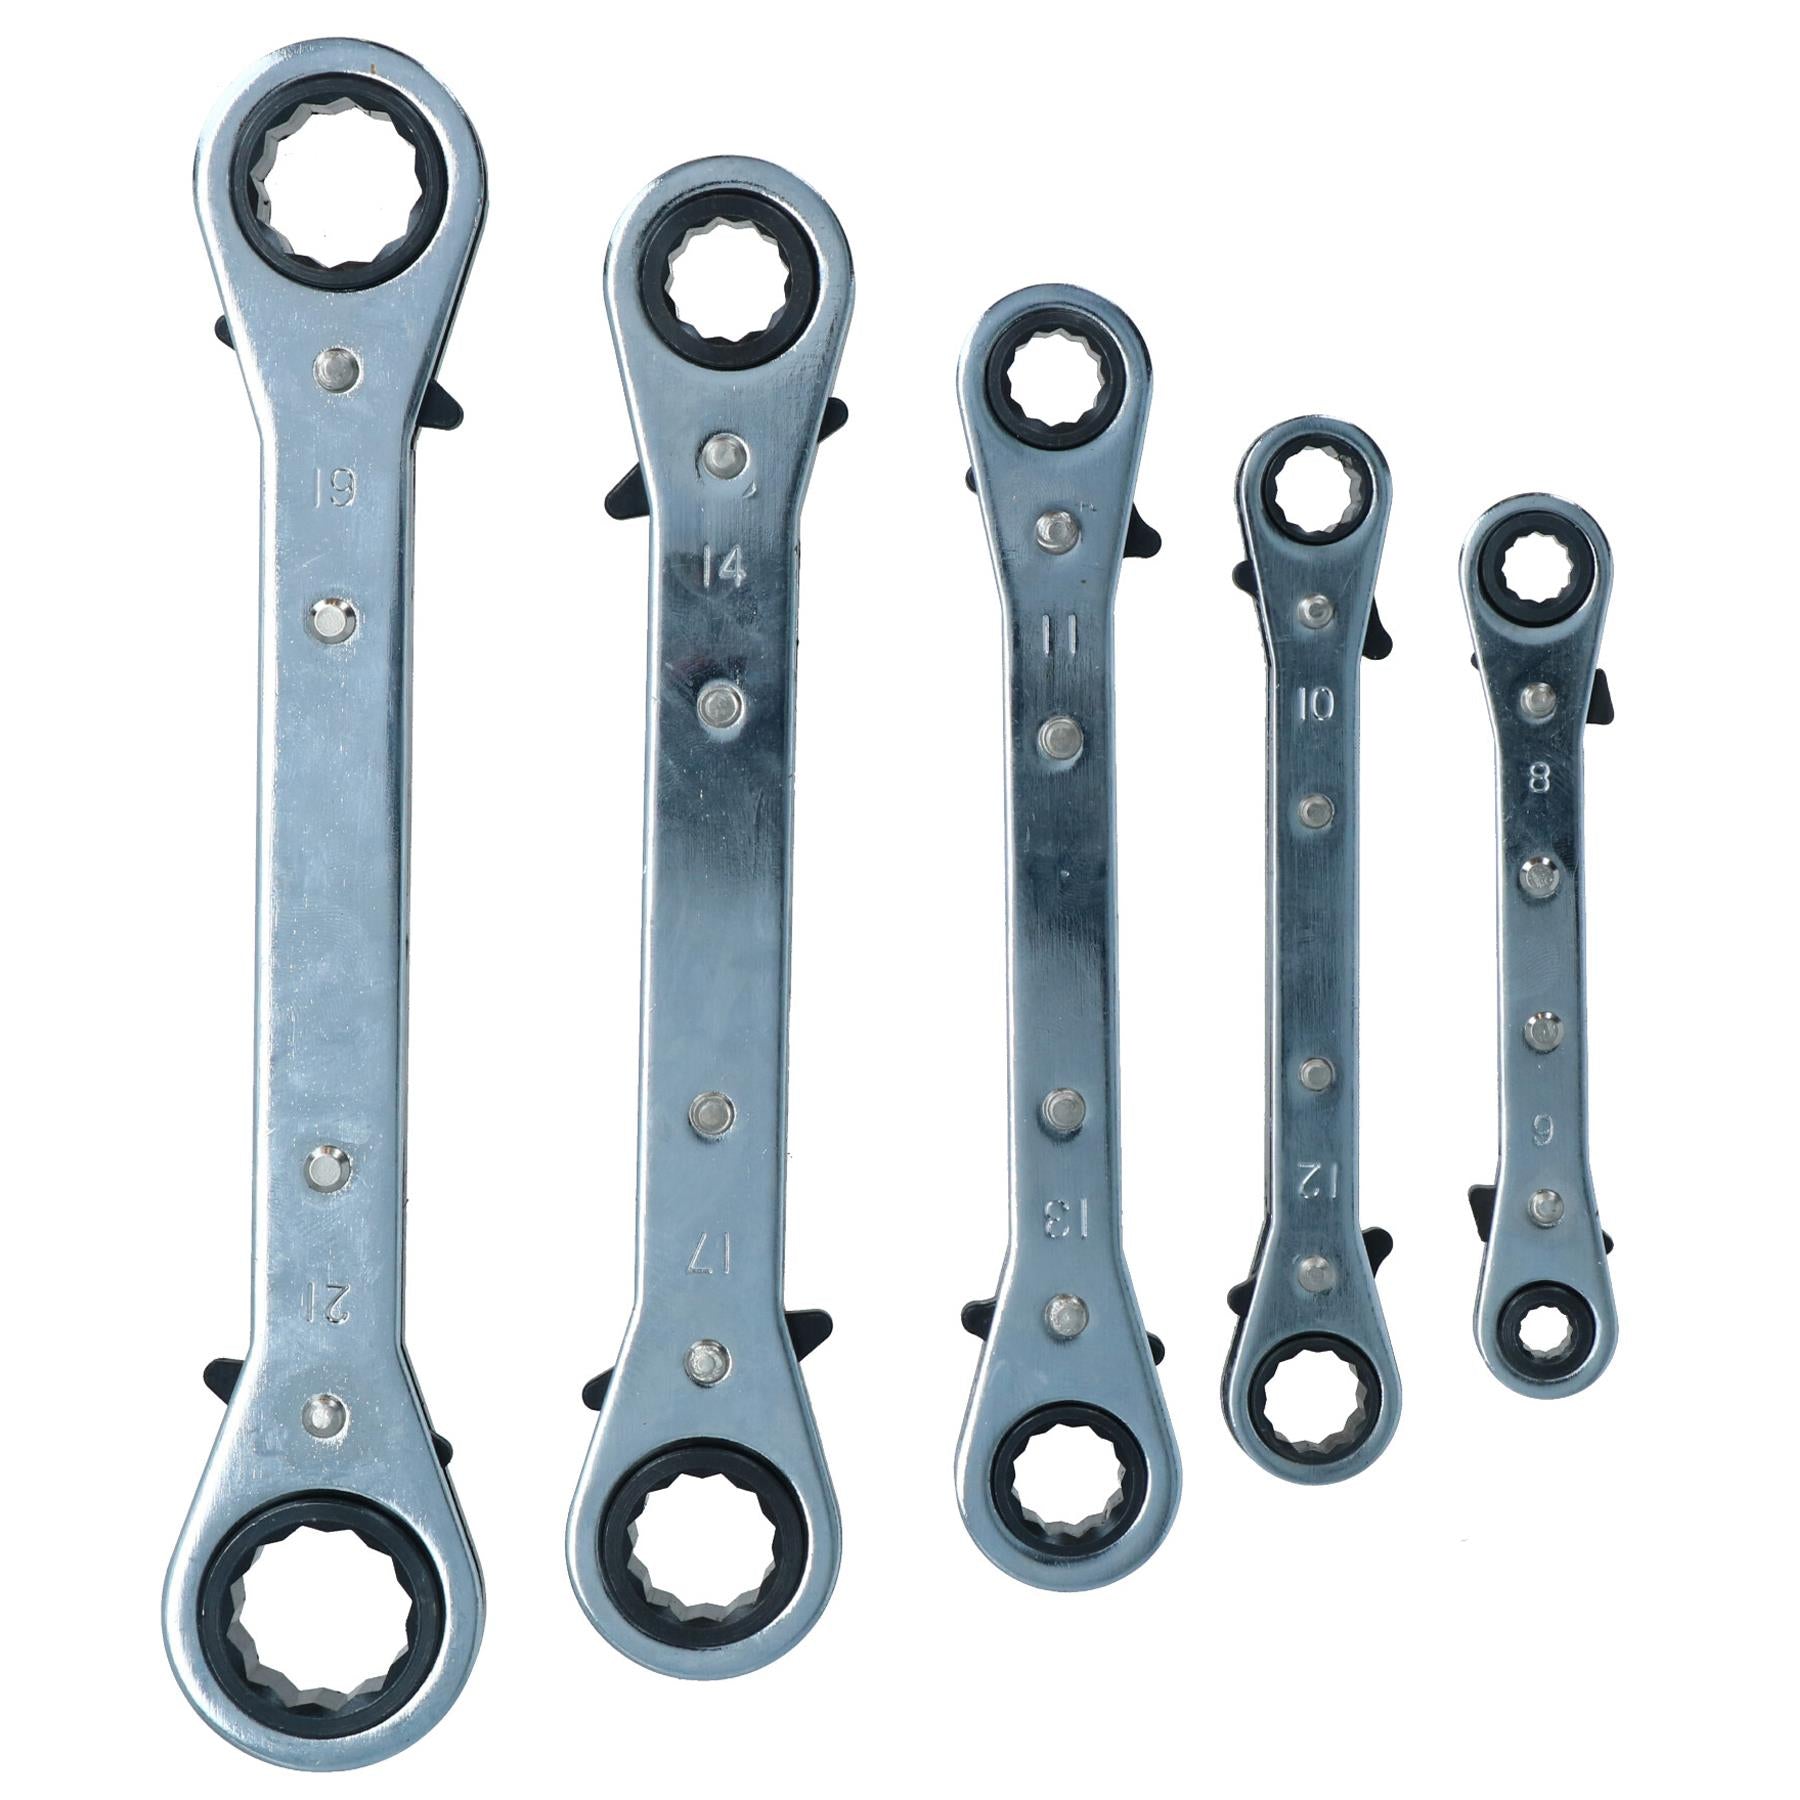 Ratchet Spanner Set Metric Sizes Double Ring Wrench TE075